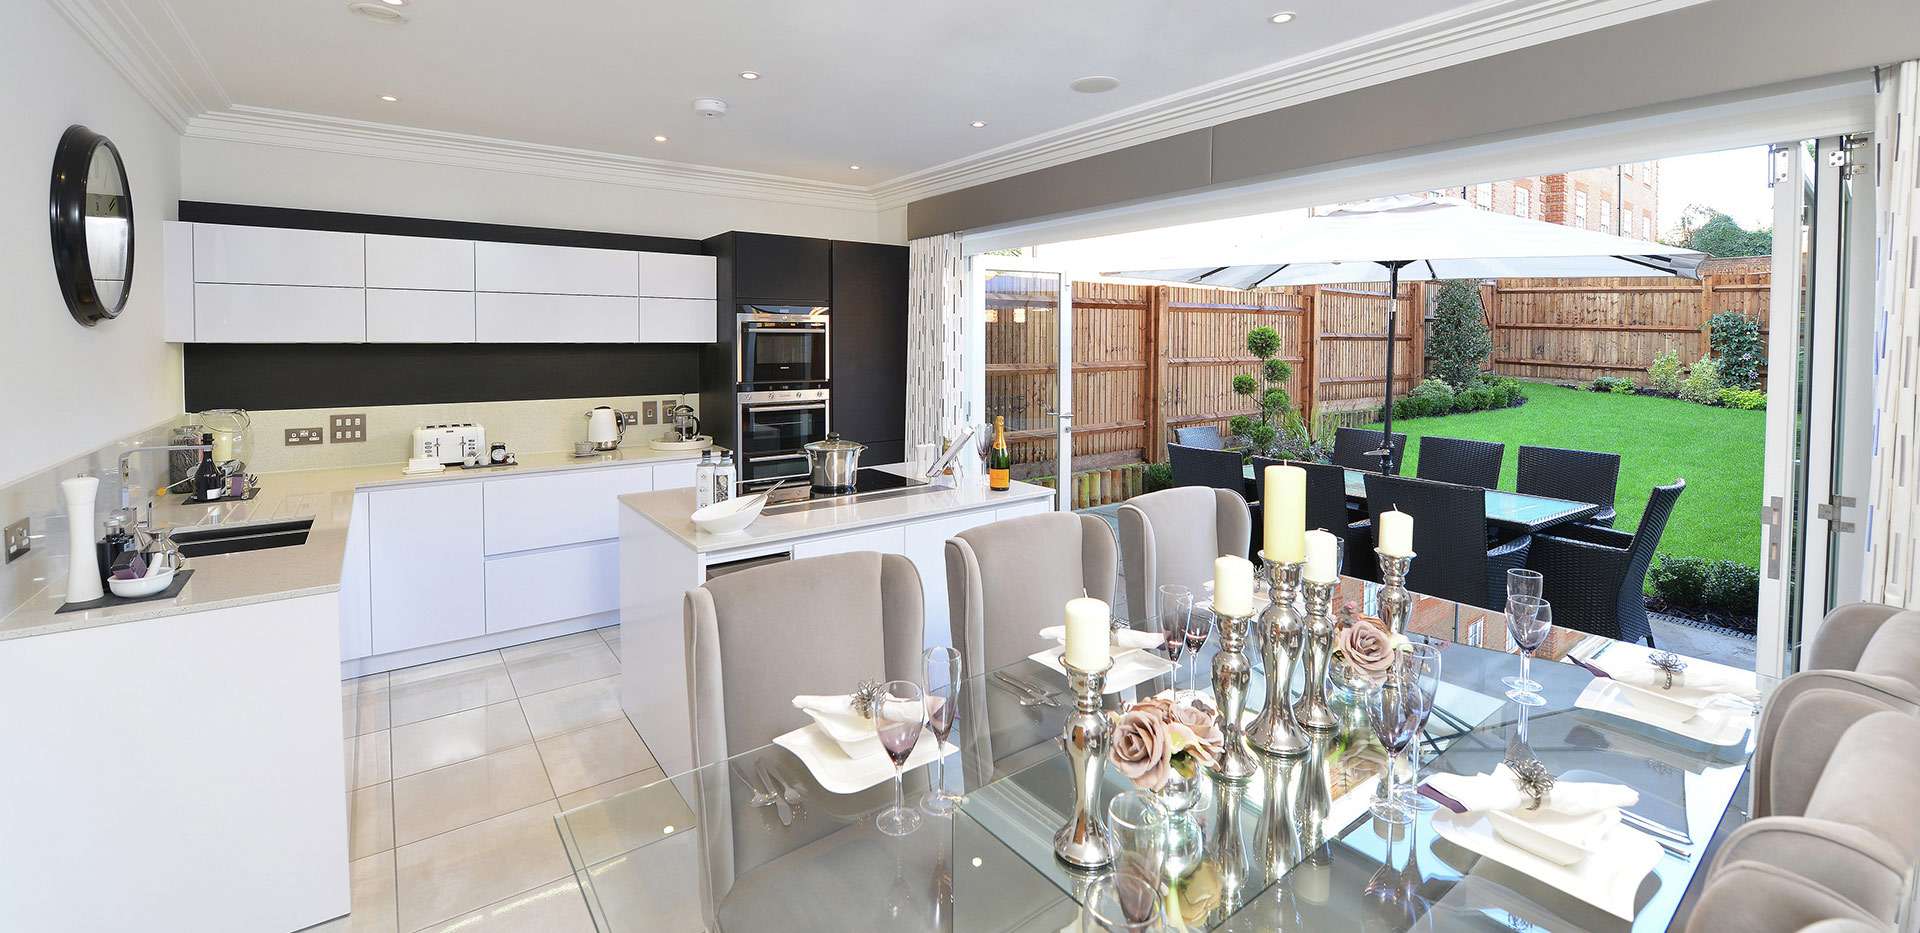 Berkeley, Finchley, The Avenue, Showhouse, Kitchen, Interior